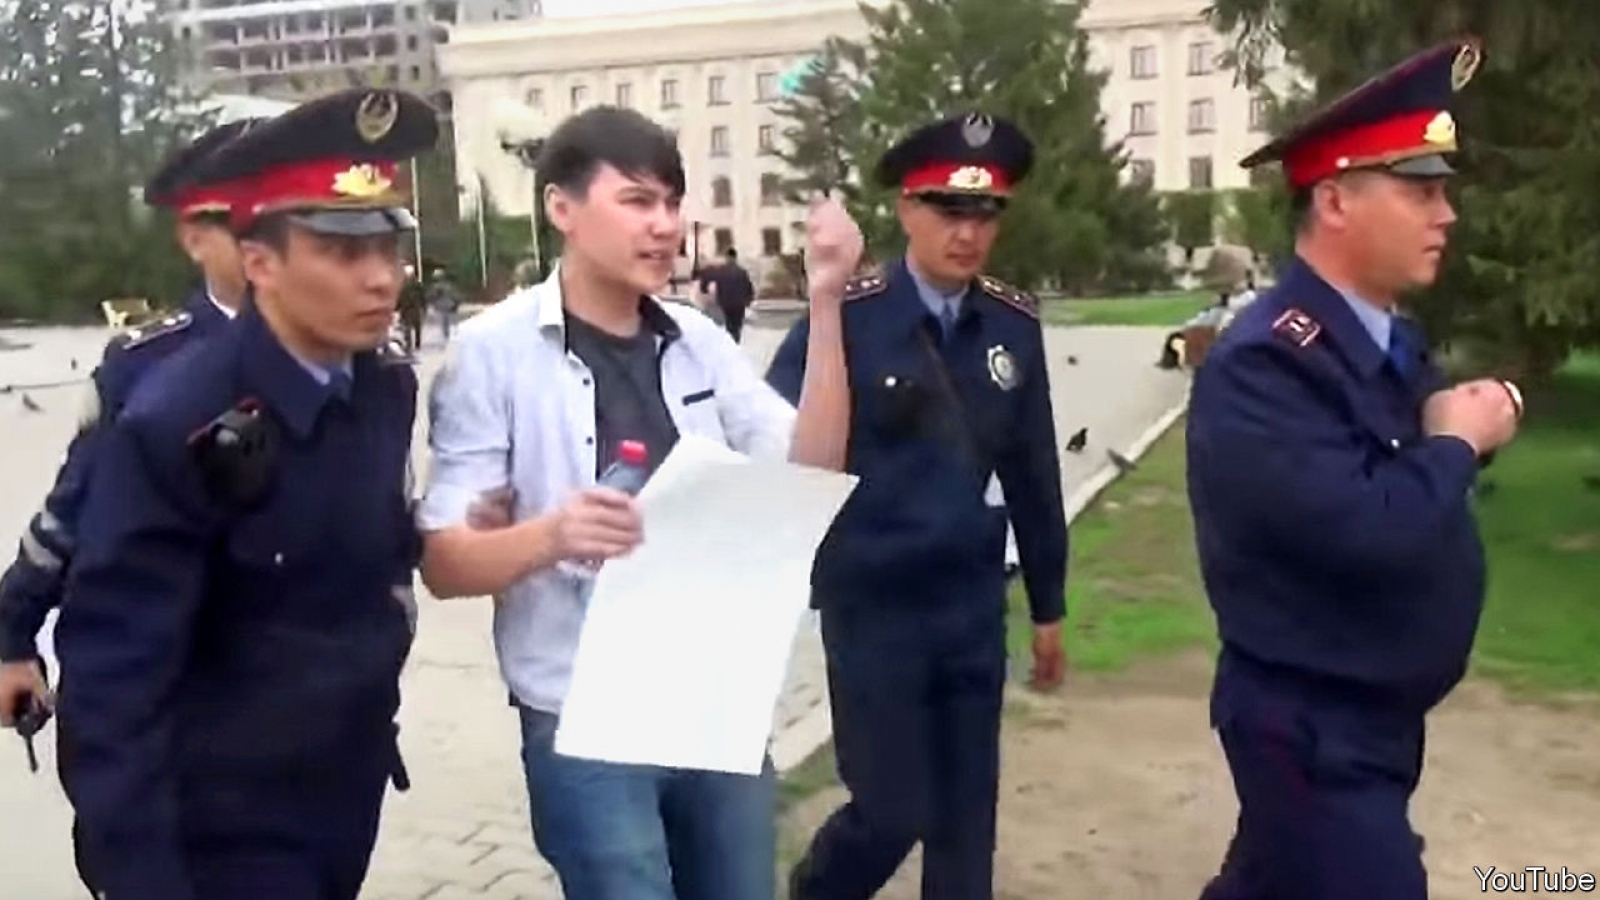 A man holding up a blank placard is arrested